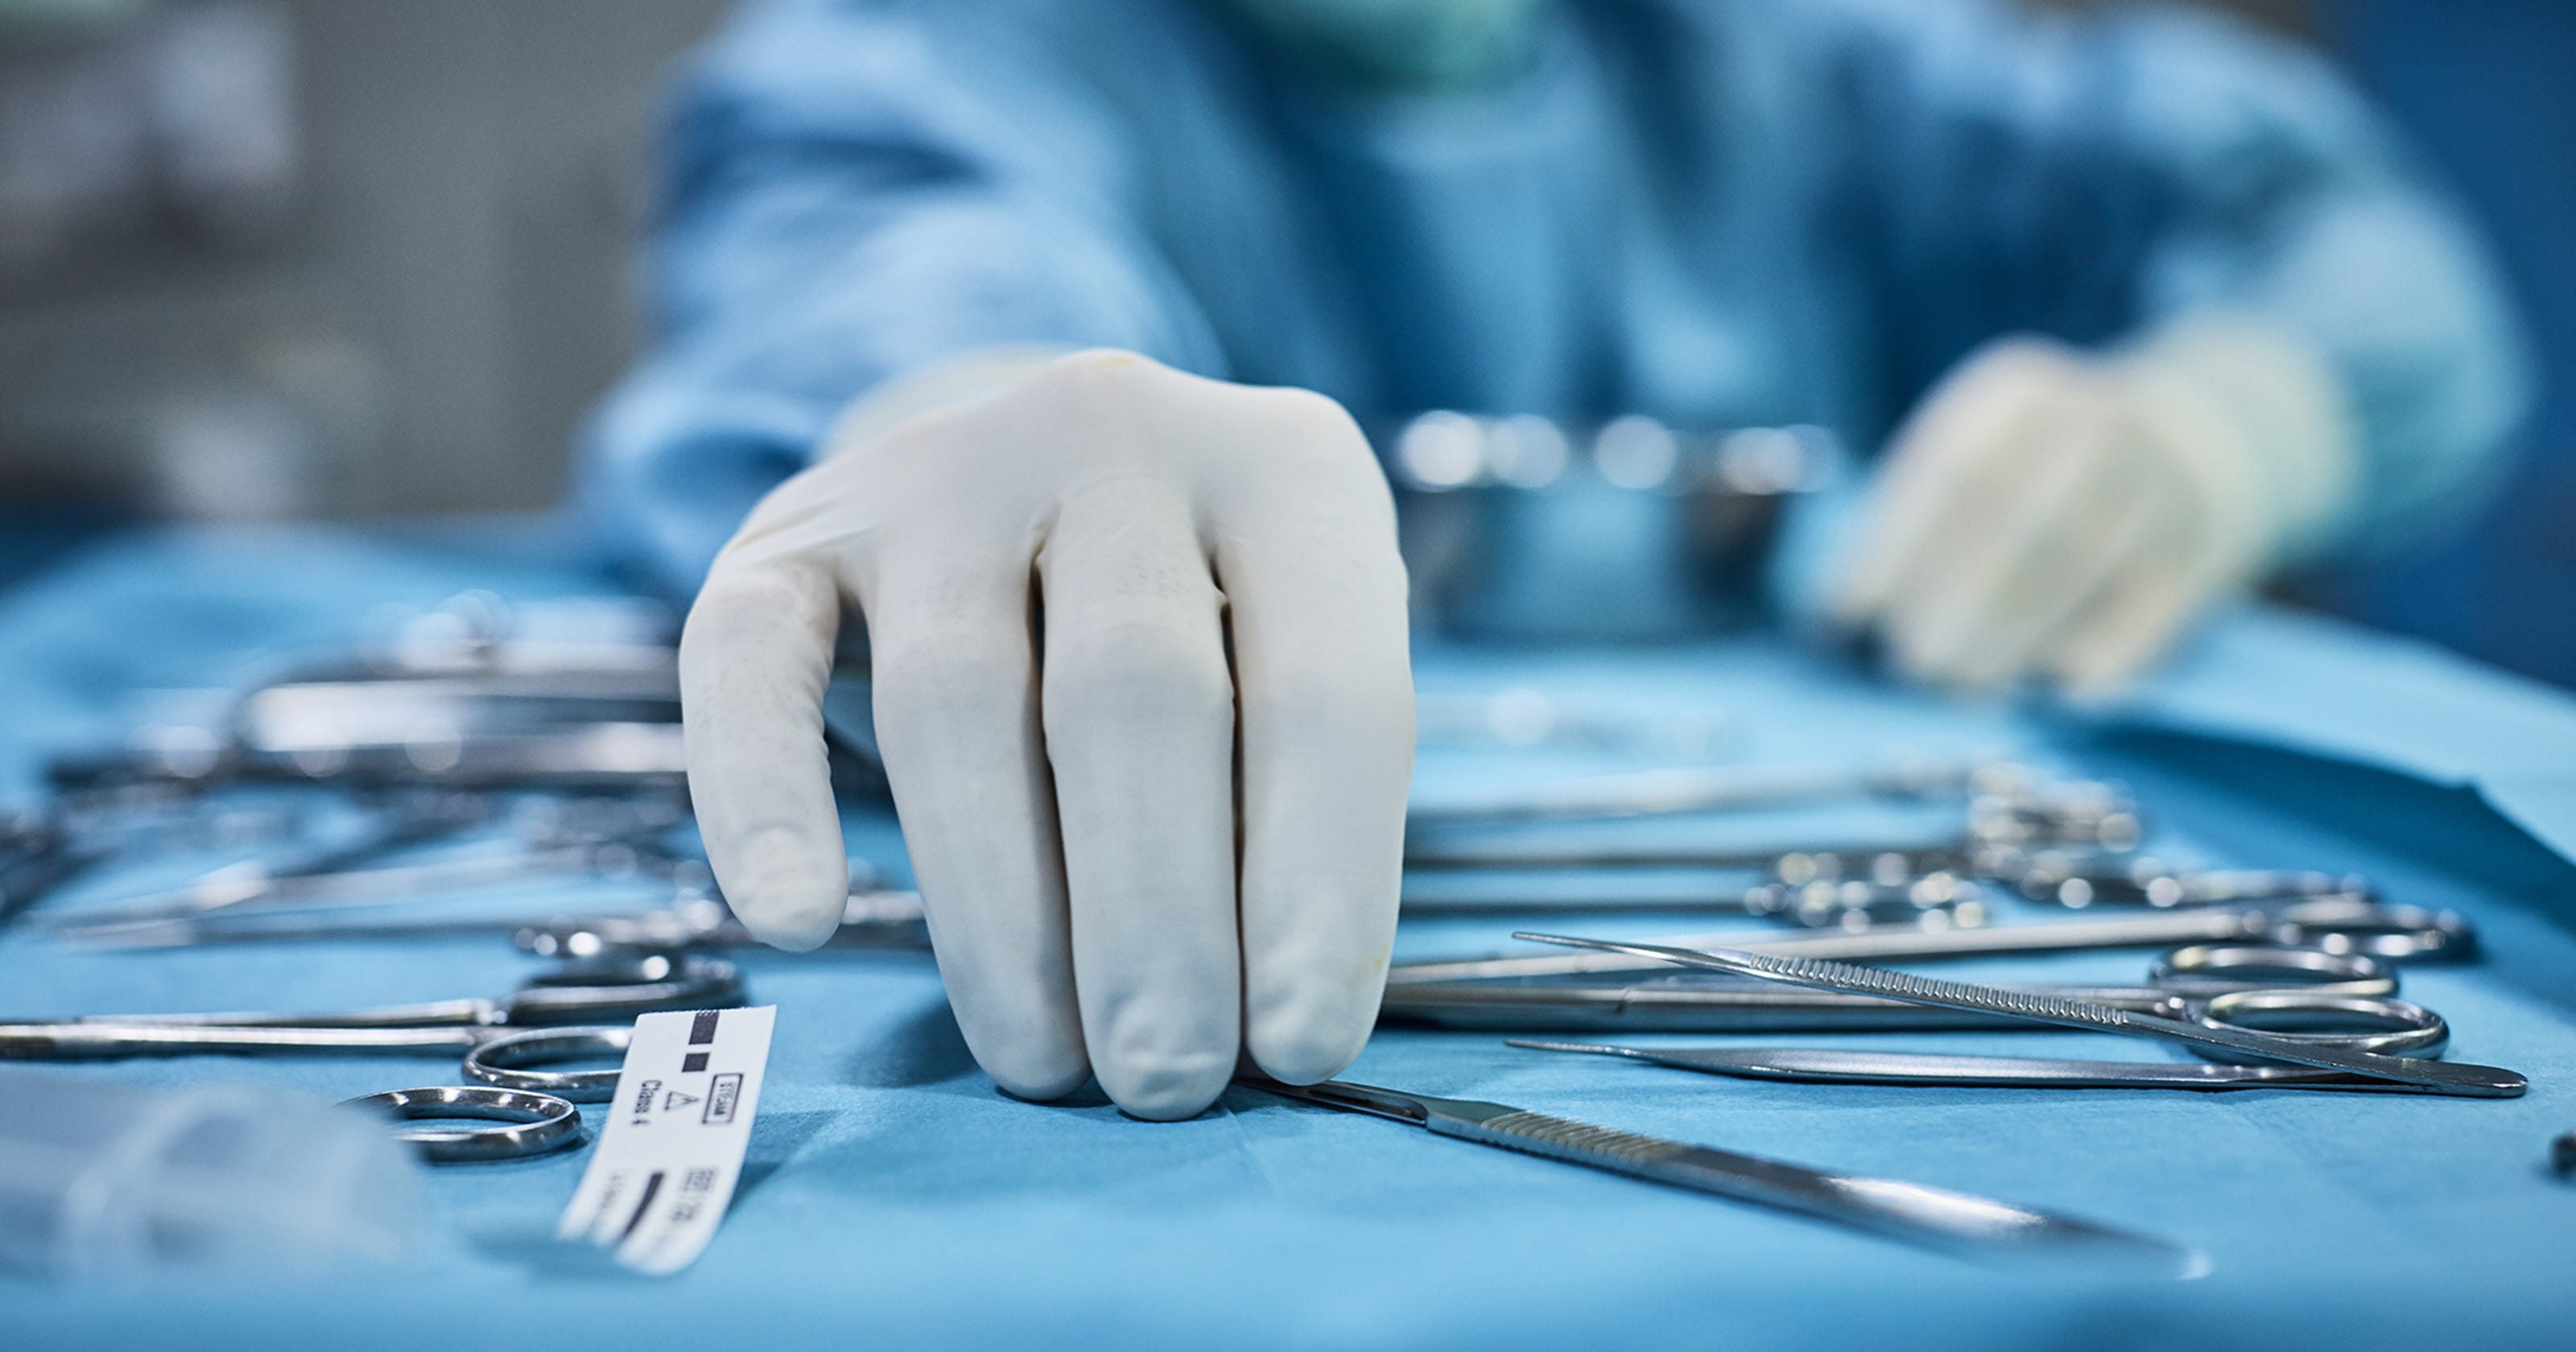 Surgeon Removes Ovaries That Were In The Way Woman Commits Suicide